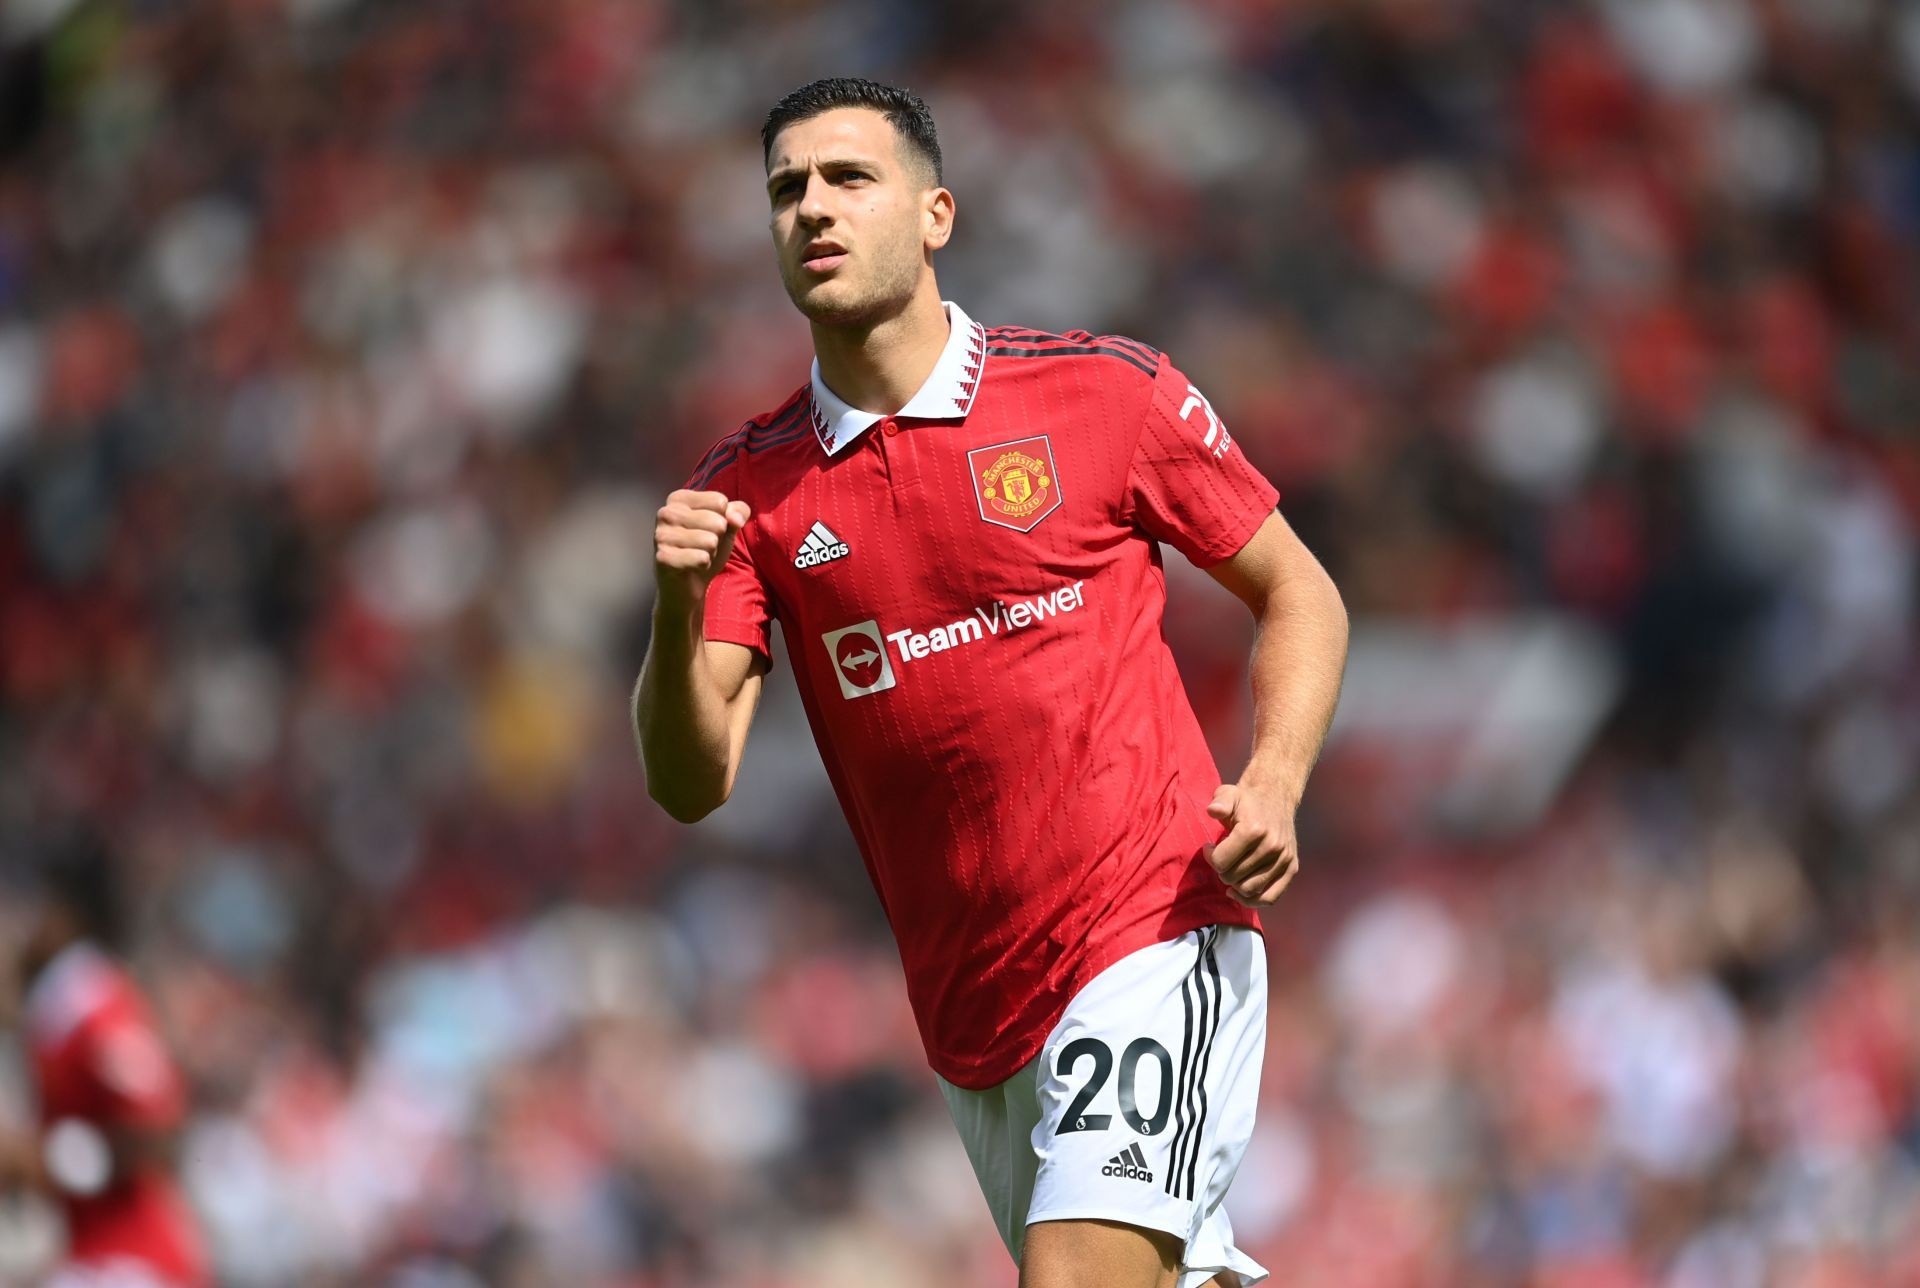 Dalot decided to stay at United